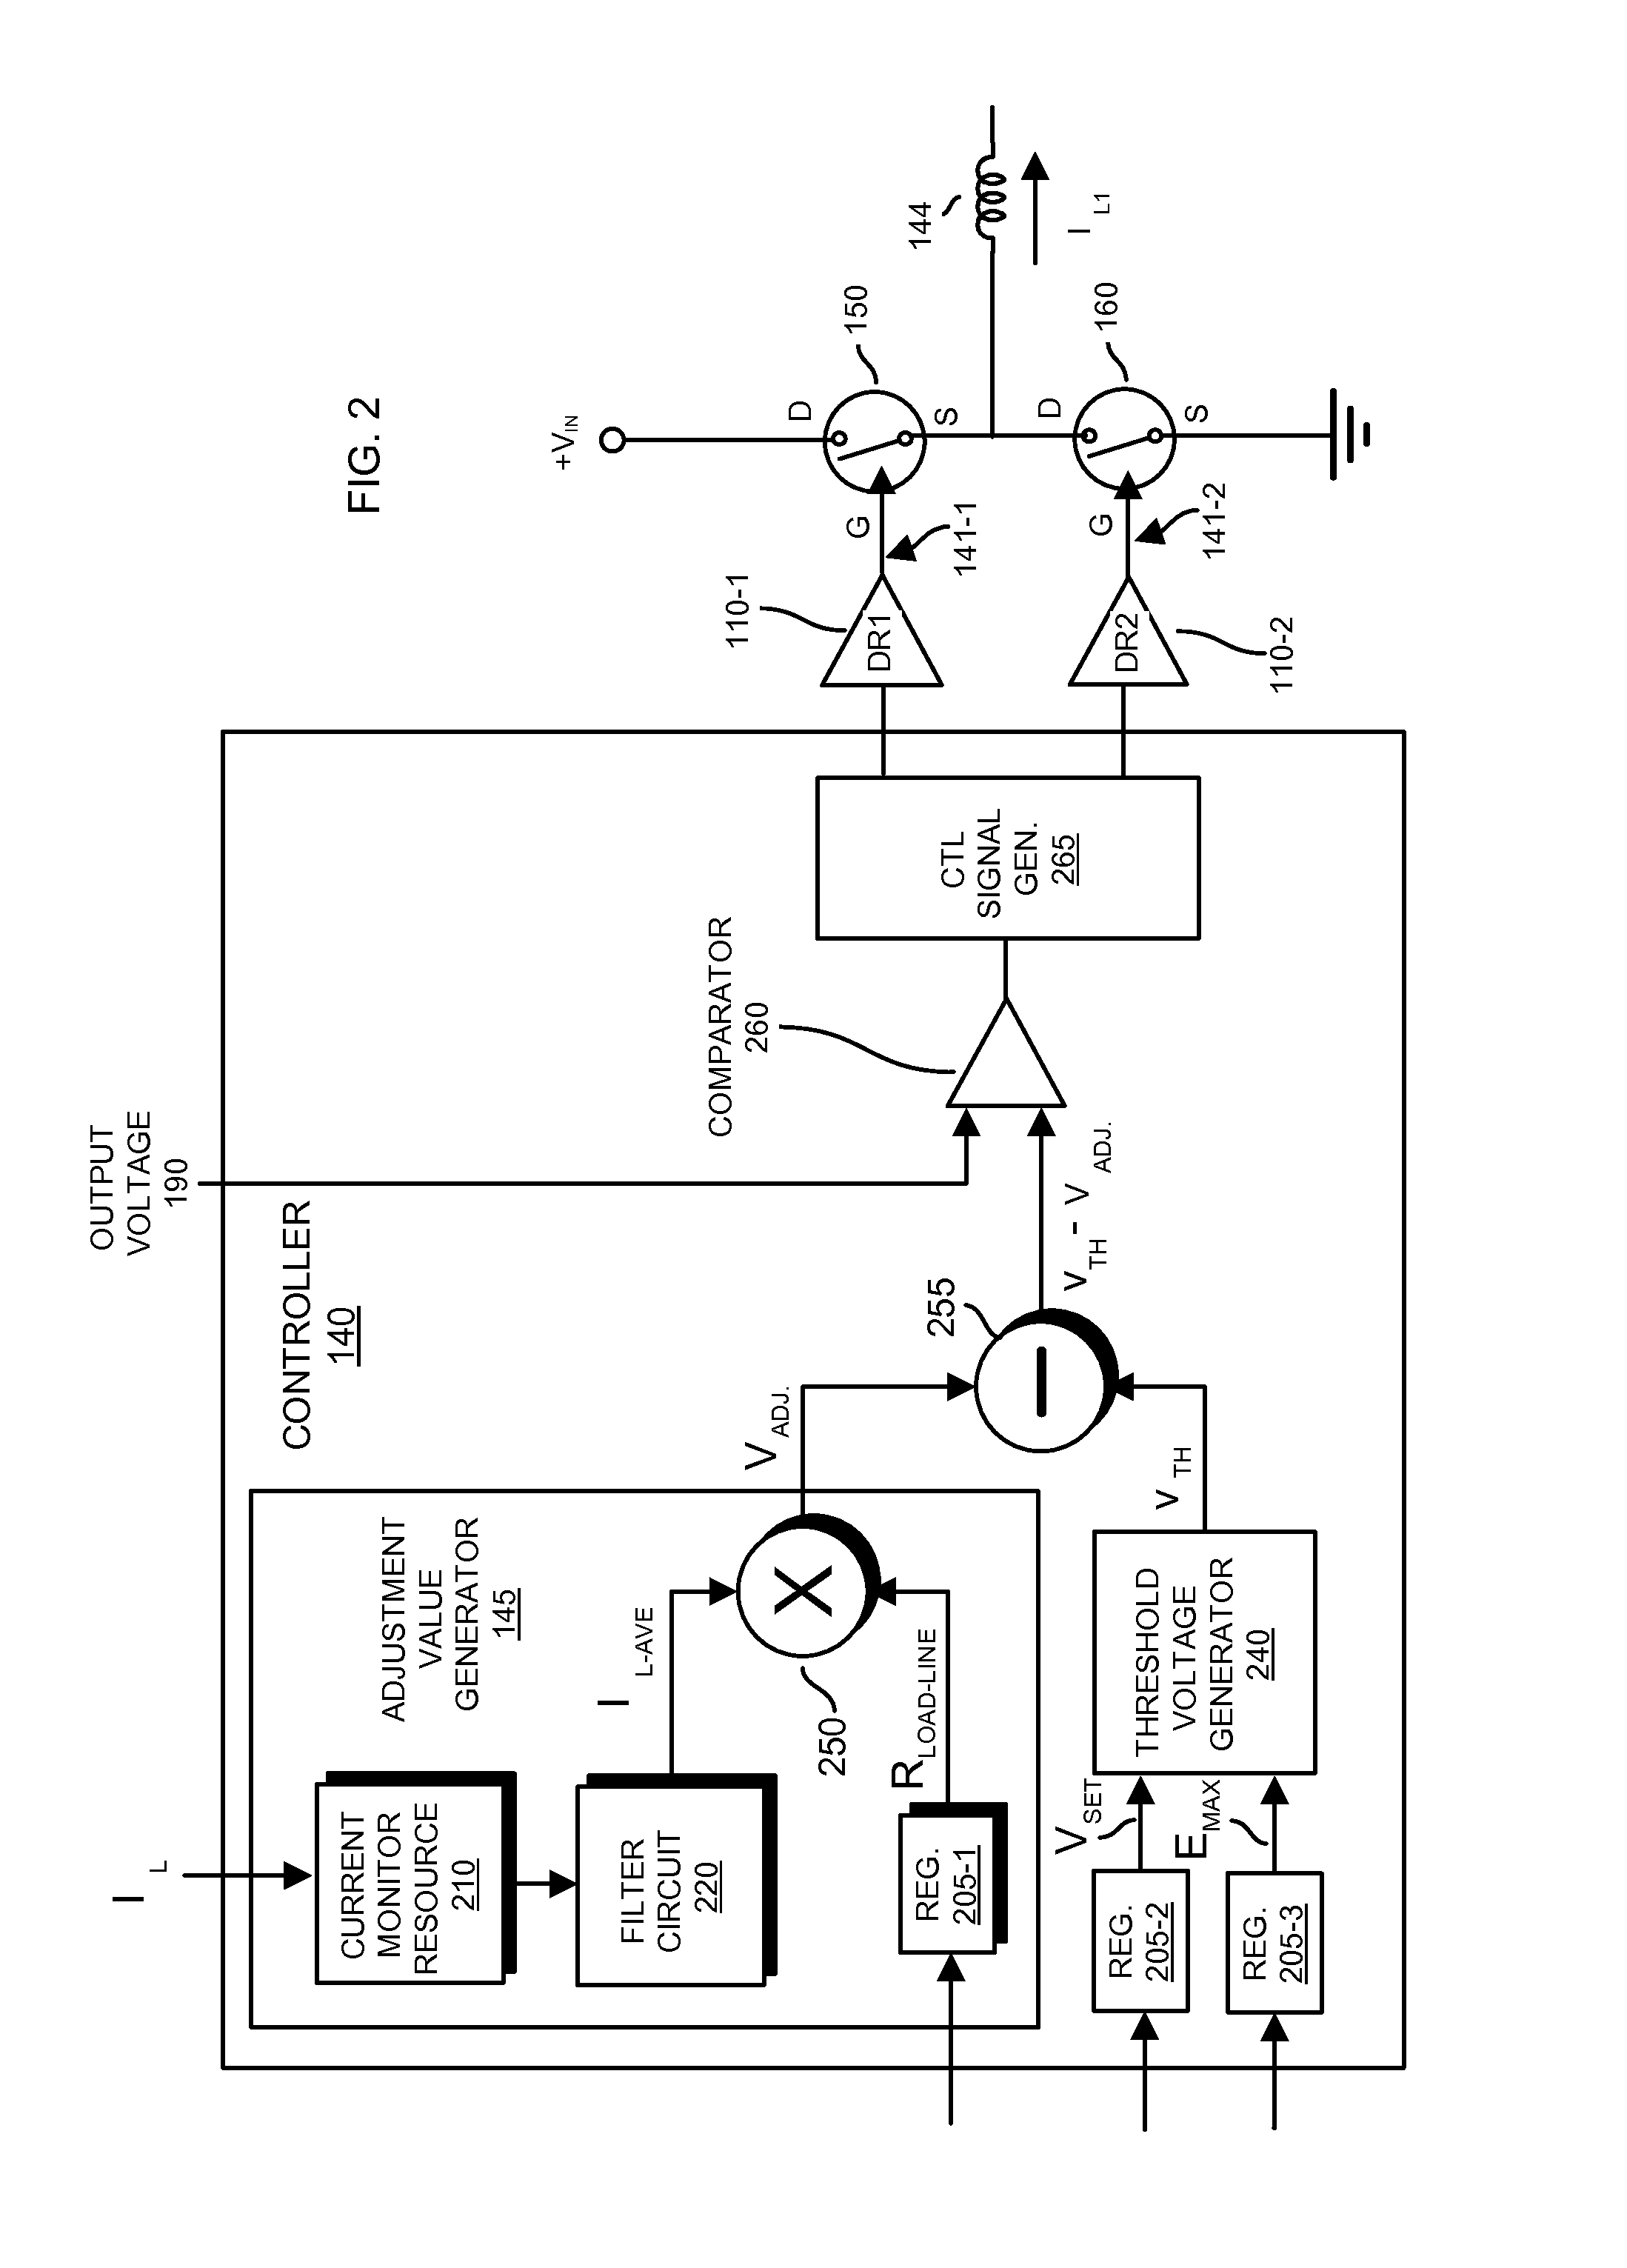 Control parameter adjustment in a discontinuous power mode